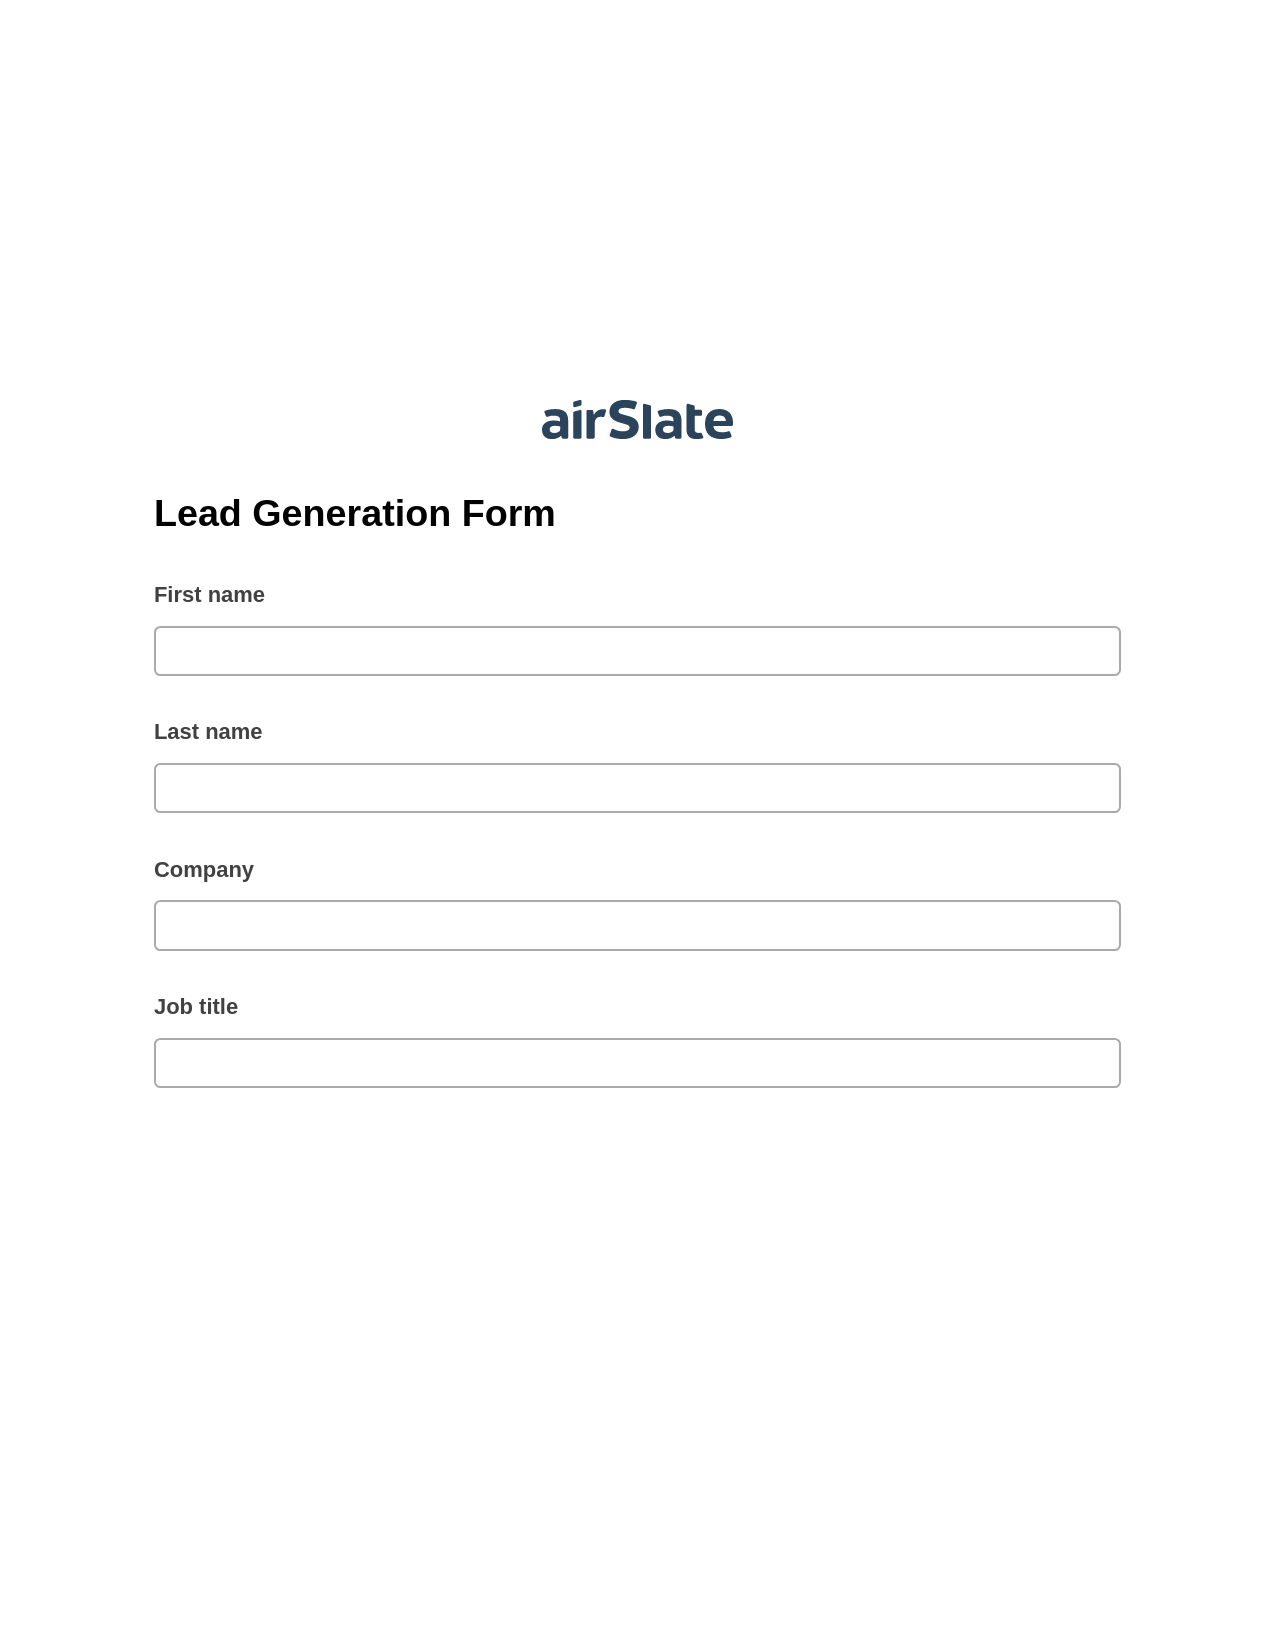 Lead Generation Form Pre-fill from Office 365 Excel Bot, Send a Slate to Salesforce Contact Bot, Archive to SharePoint Folder Bot